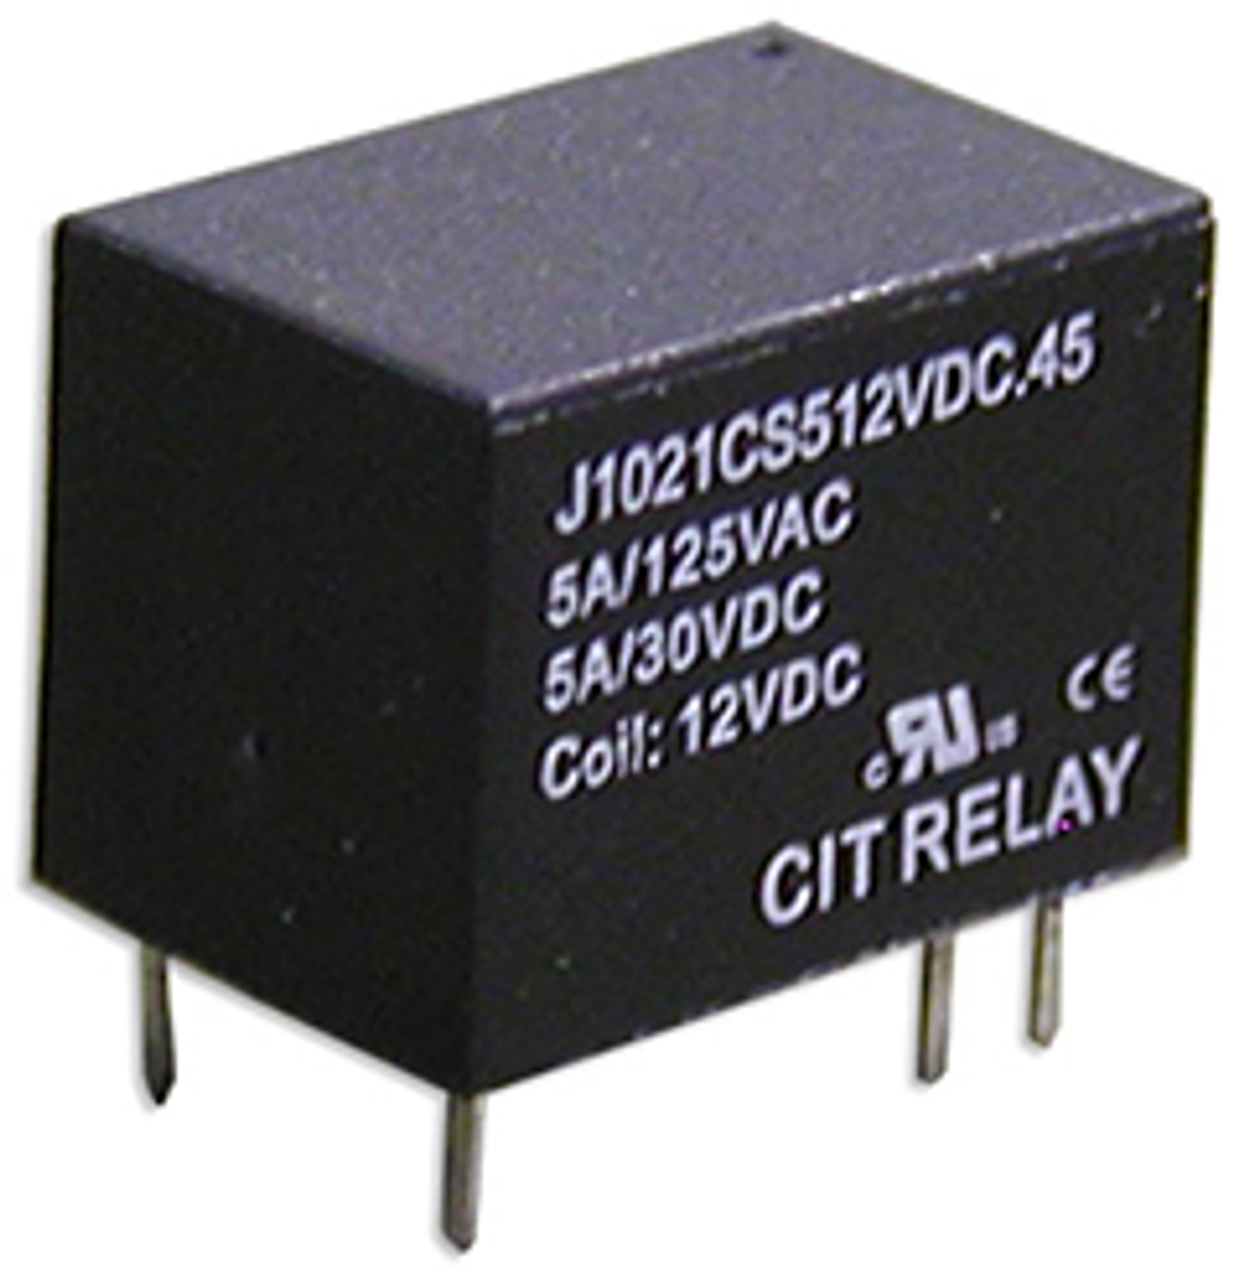 CIT Relay and Switch J1021BS324VDC.36 Power Relays